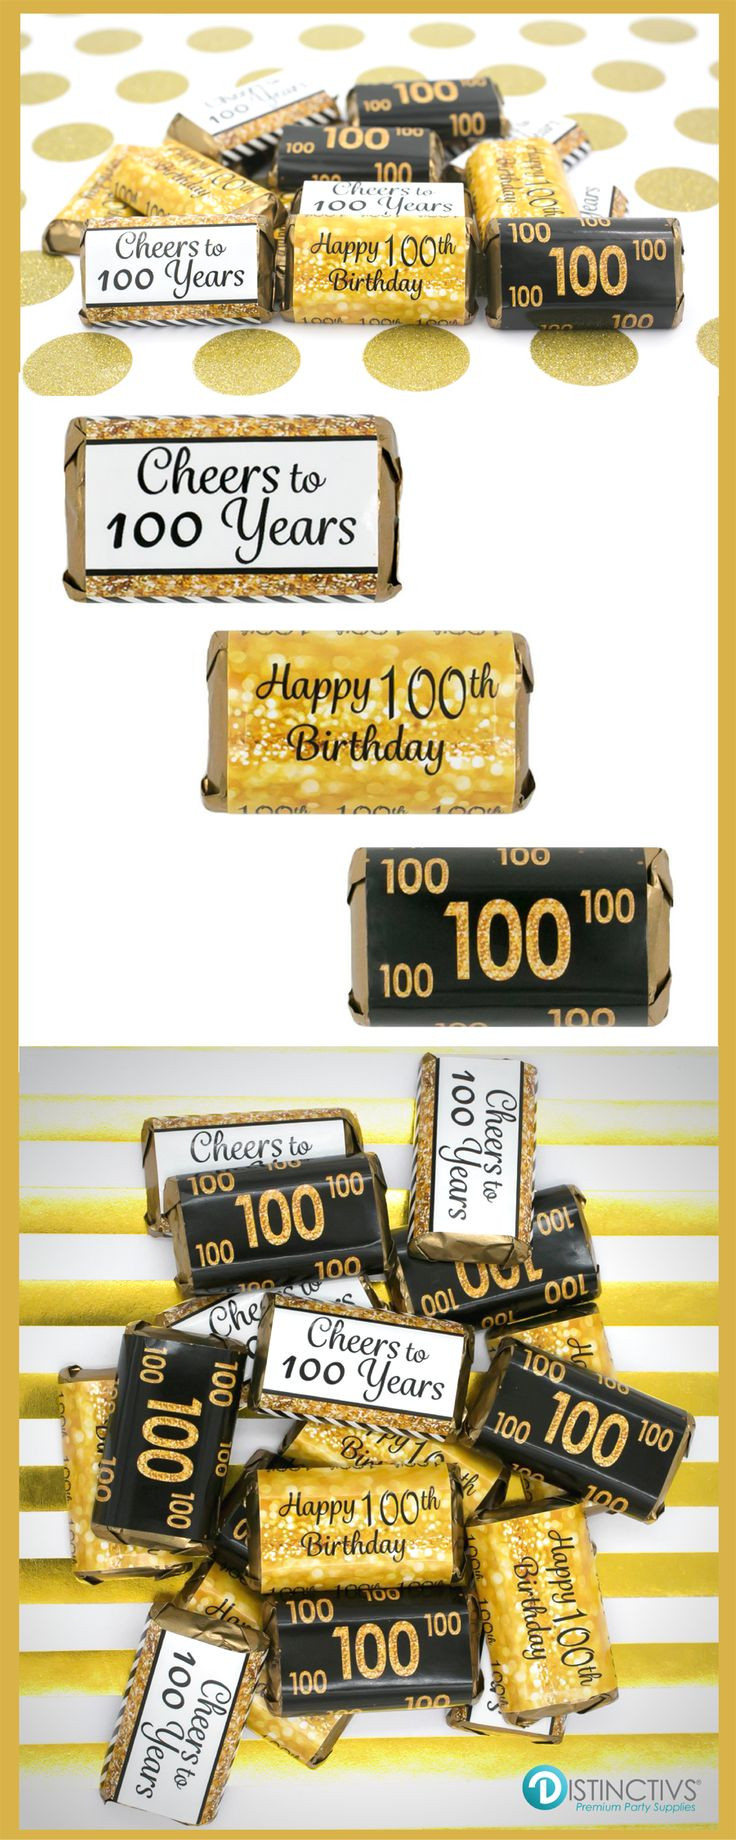 100Th Day Anniversary Gift Ideas
 14 best Ideas for Centerpieces for Great Gram s 100th